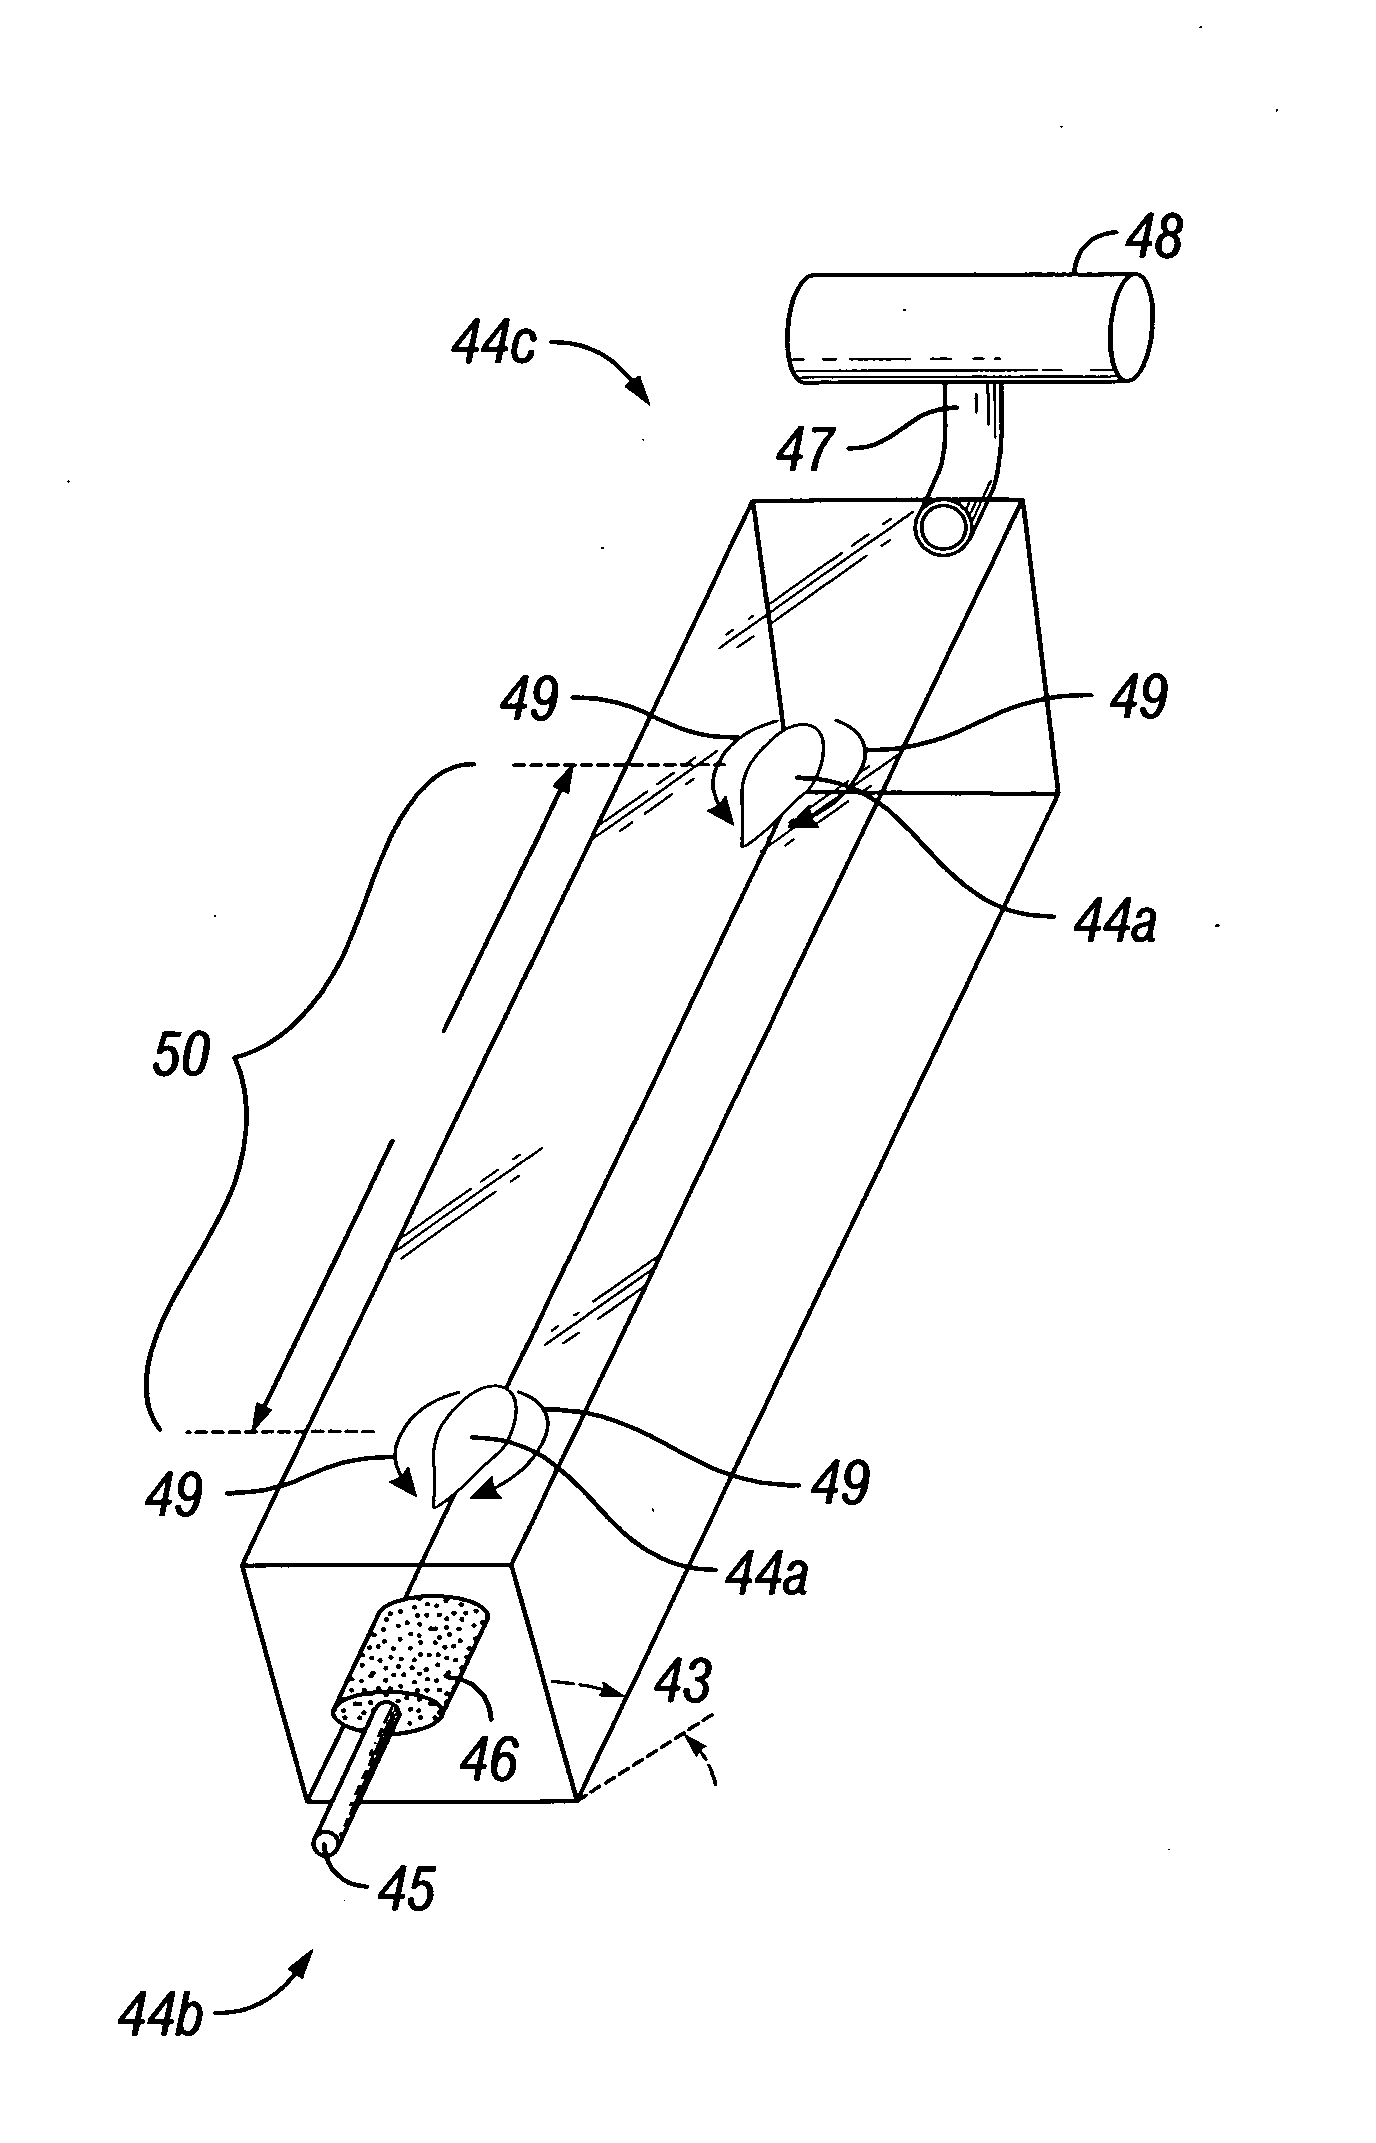 Large-scale photo-bioreactor using flexible materials, large bubble generator, and unfurling site set up method